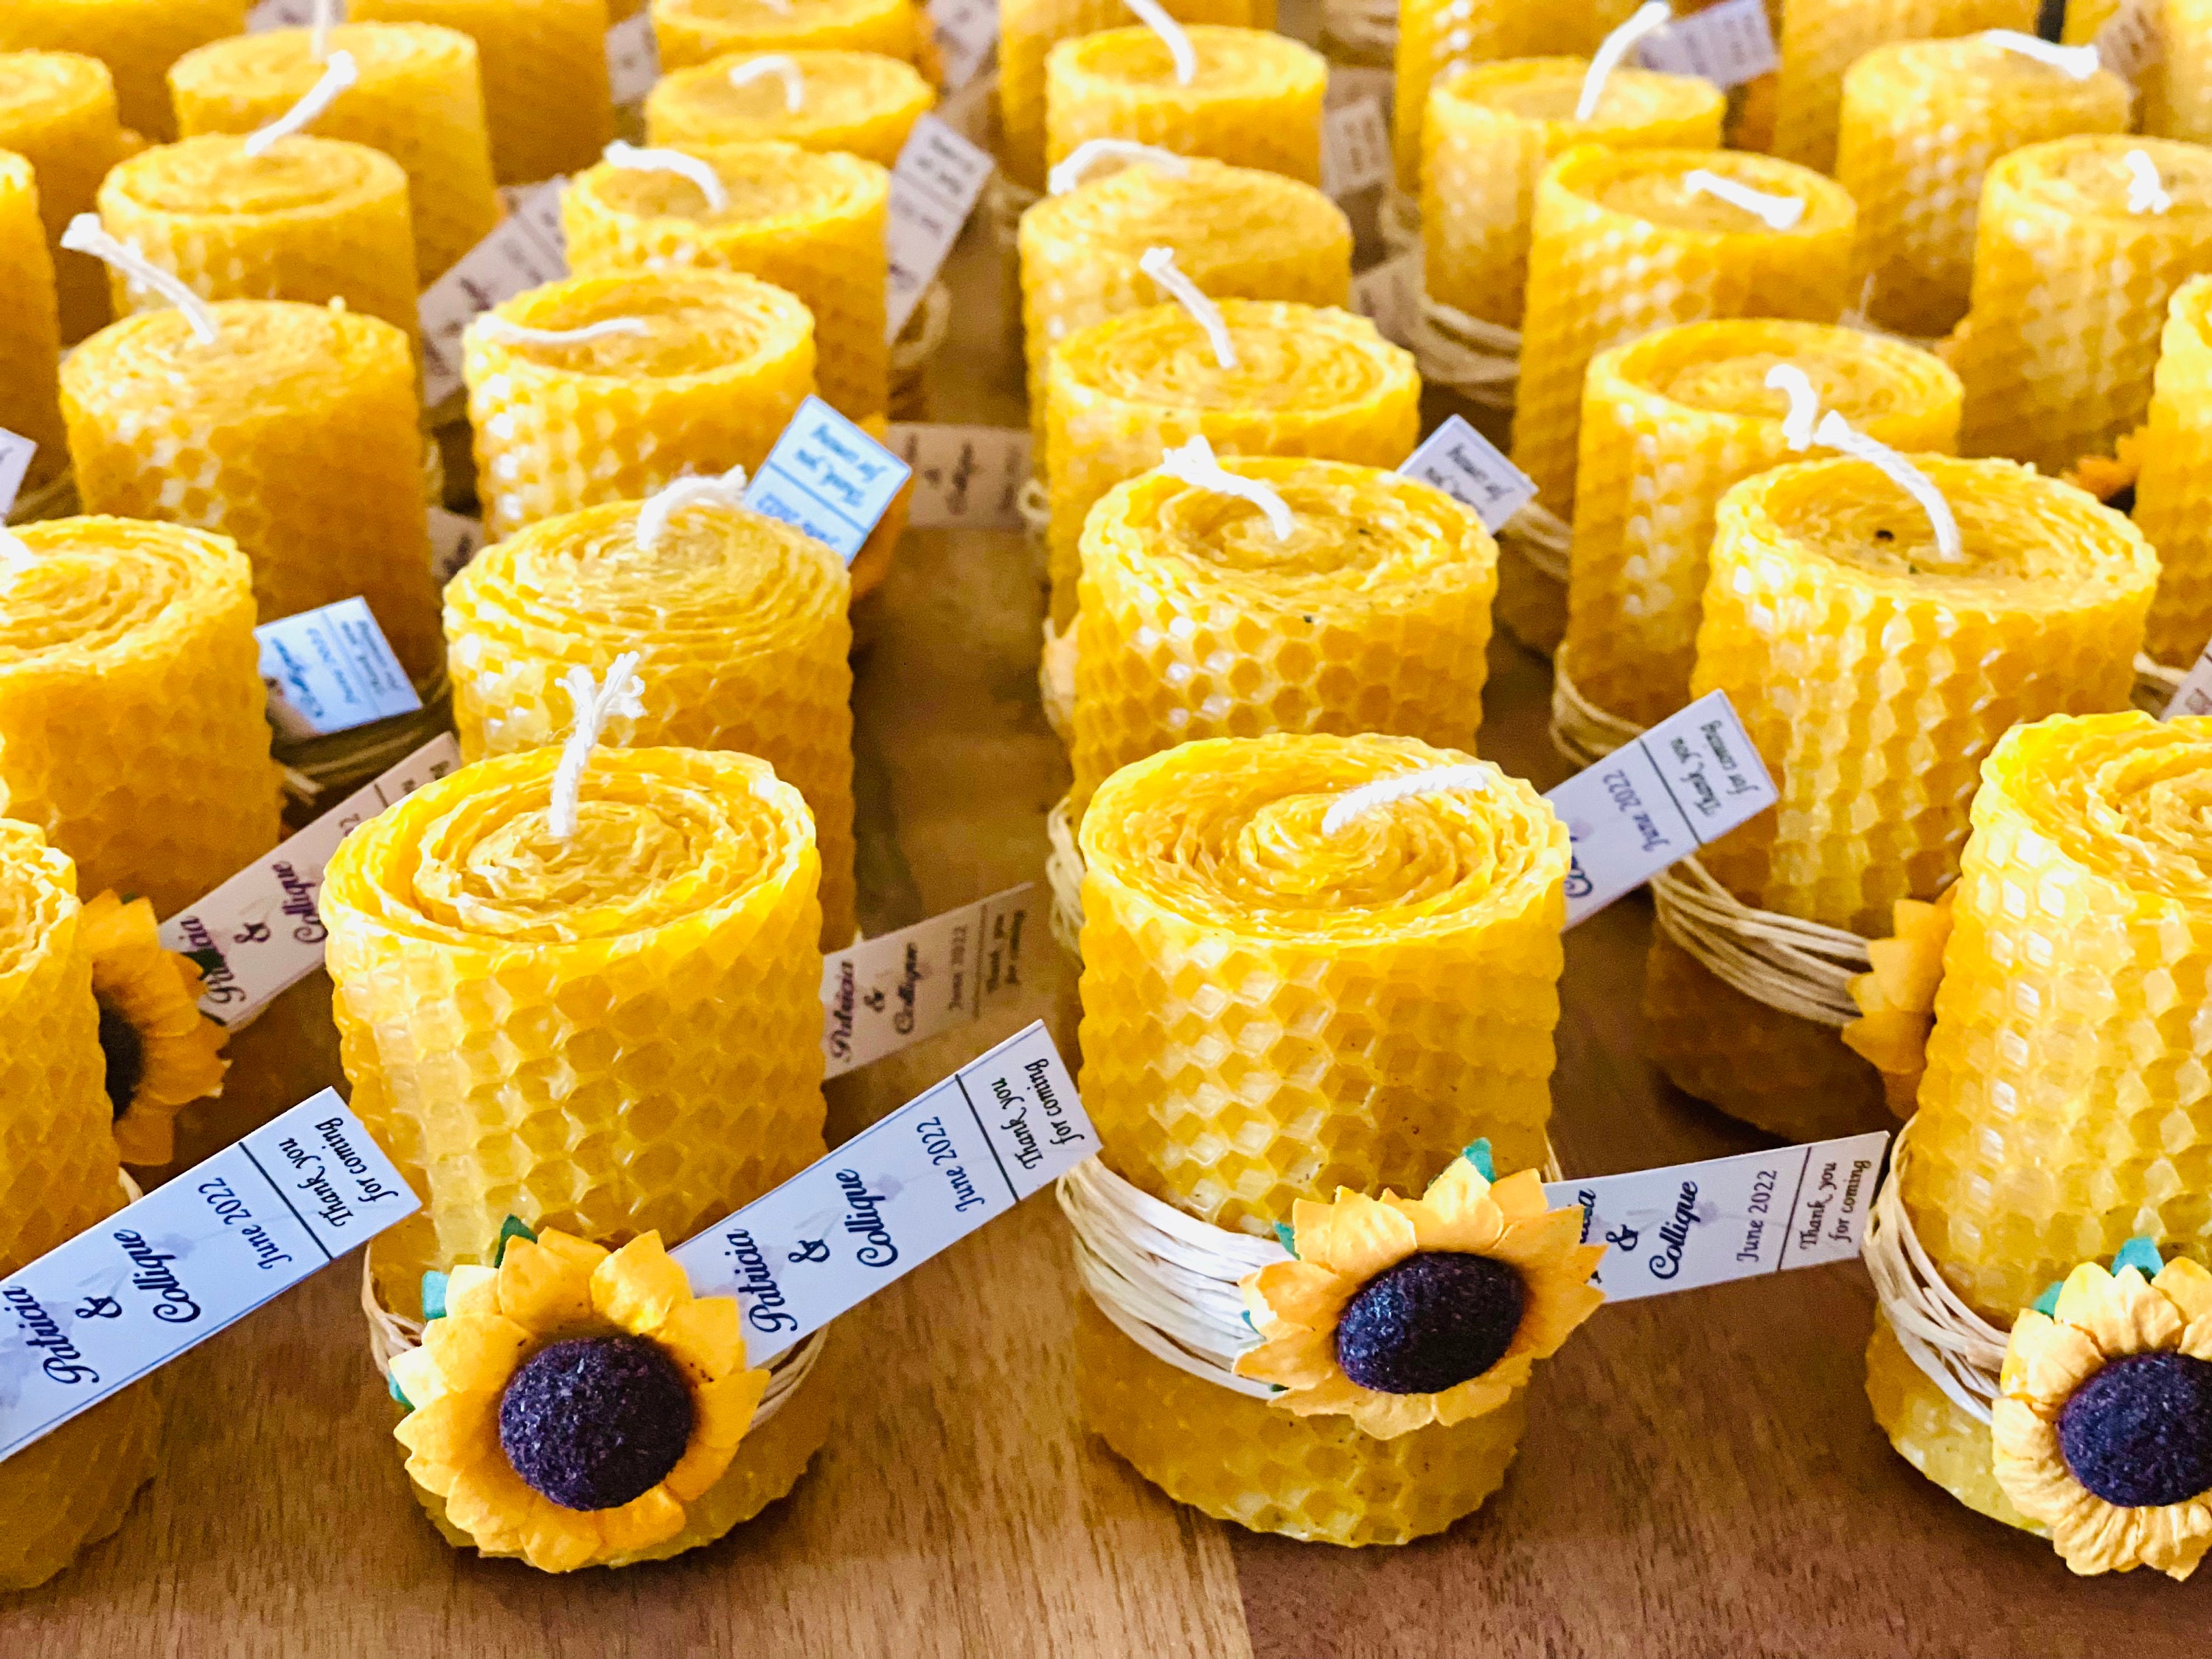 Sunflower & 100 % Pure Beeswax Candle BULK Favors Rustic 